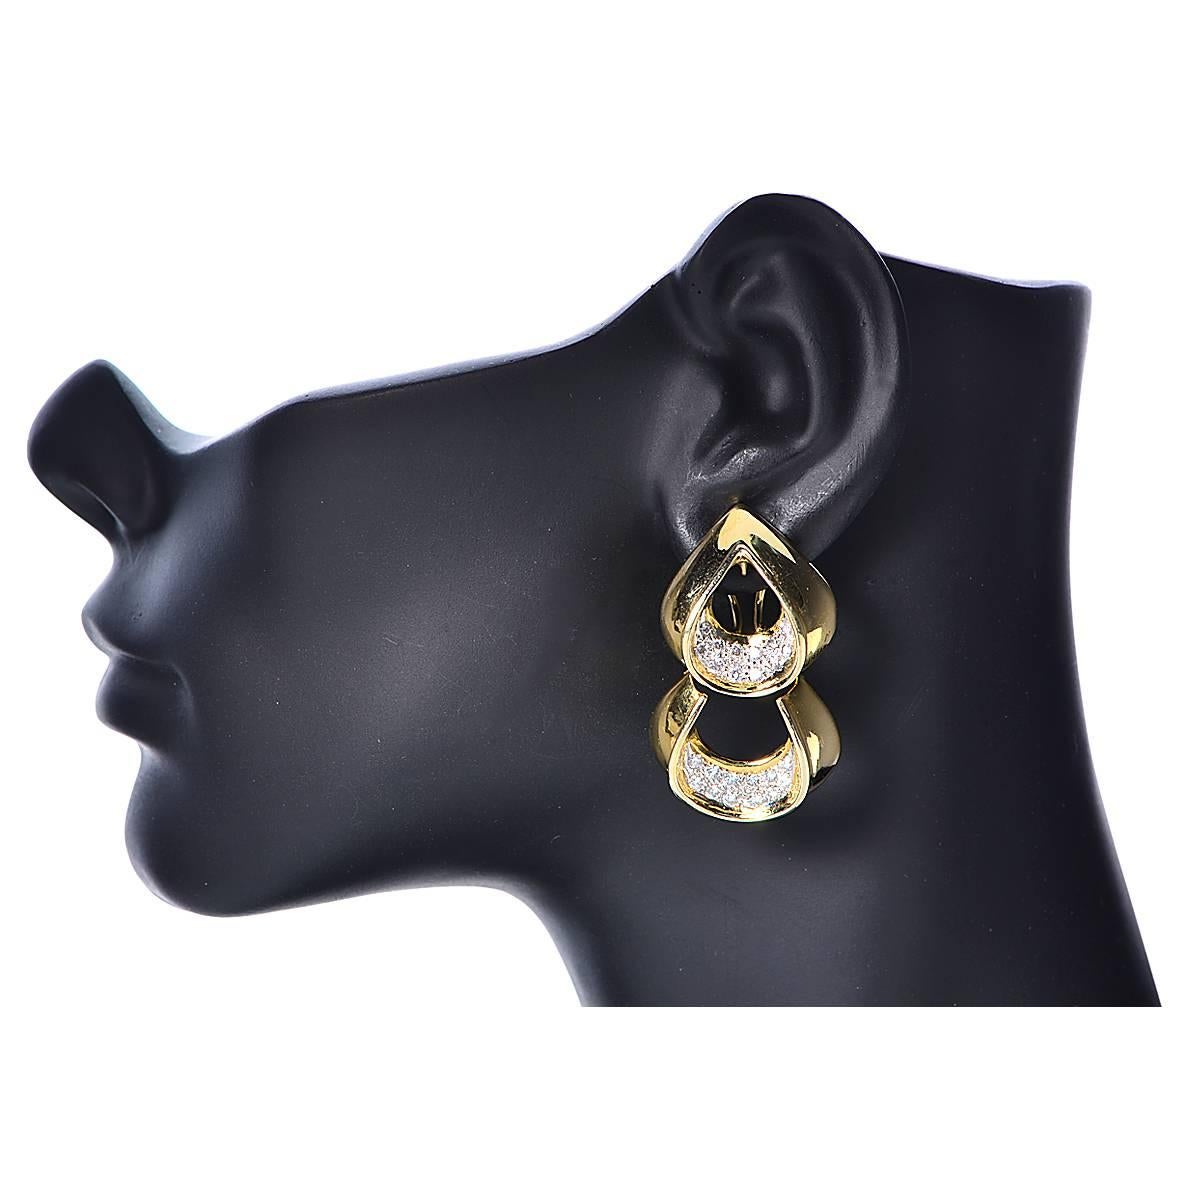 18k yellow gold earrings featuring 48 round brilliant cut diamonds weighing approximately 2cts, F color, VS1 clarity.

The earrings measure 1.75 inches in length by 1.25 inches in width by 11/16 inch in depth.
They weigh 22.15 grams

These beautiful